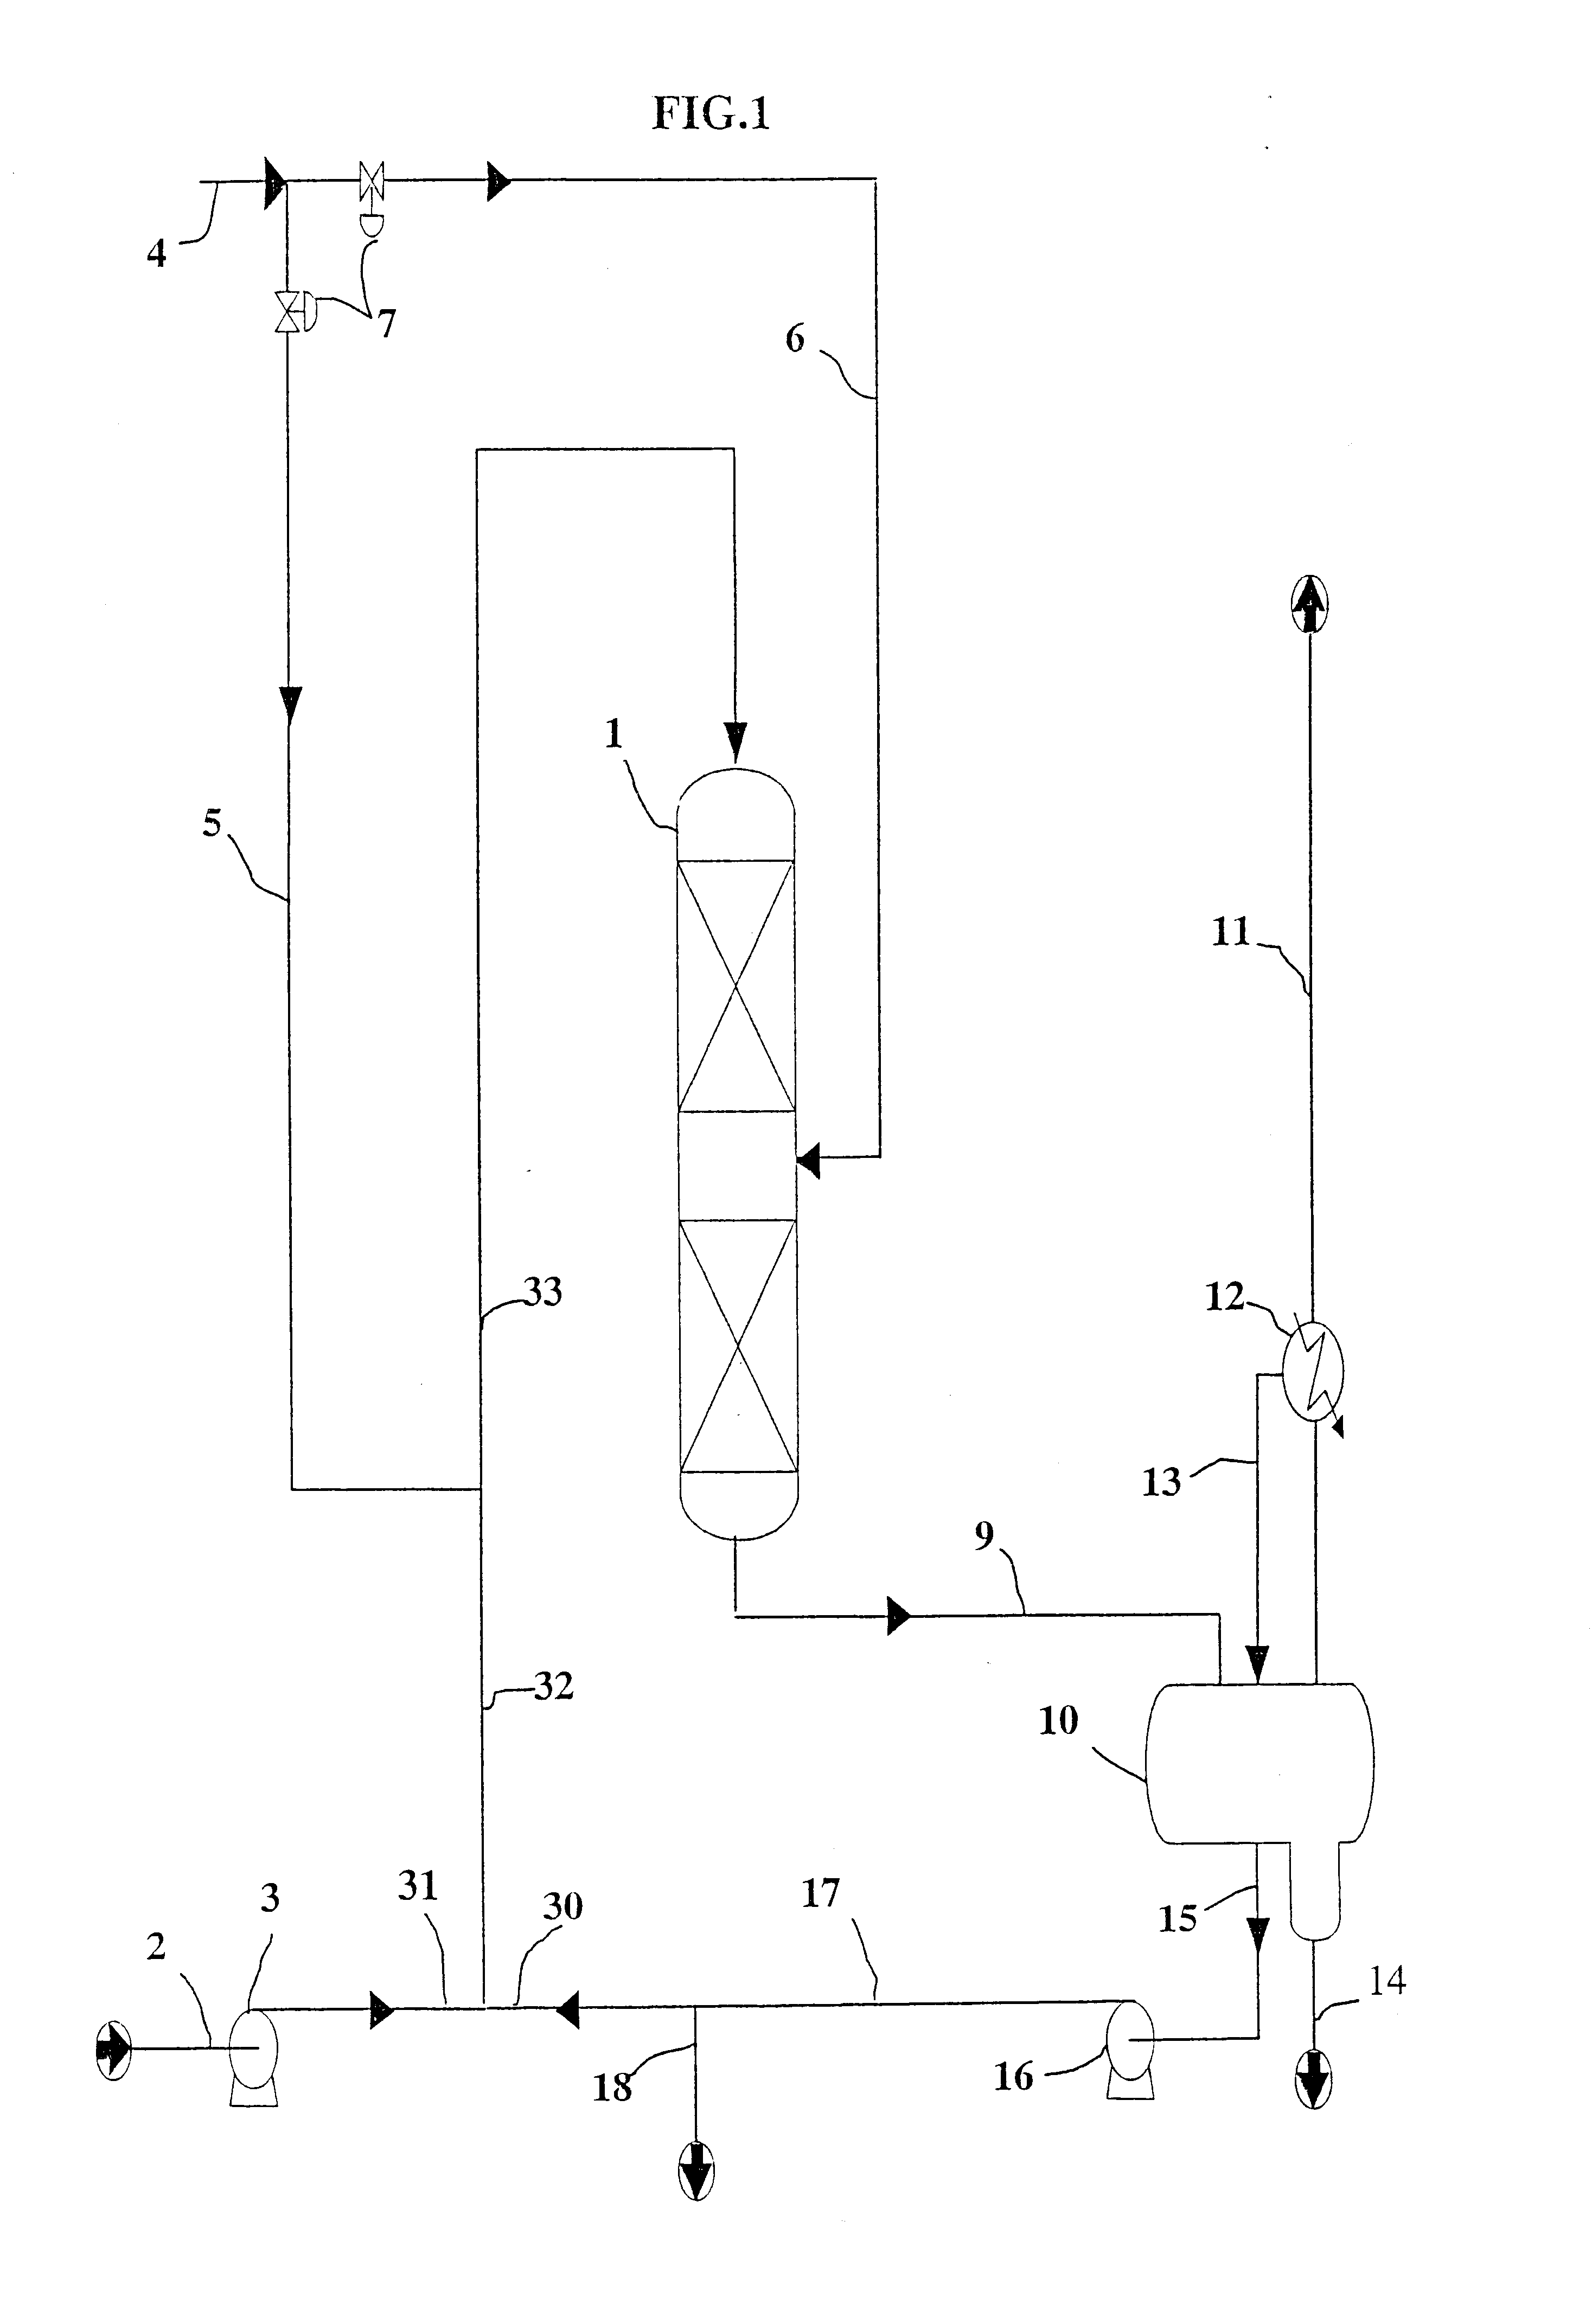 Process for hydrogenating cuts containing hydrocarbons, in particular unsaturated molecules containing at least two double bonds or at least one triple bond